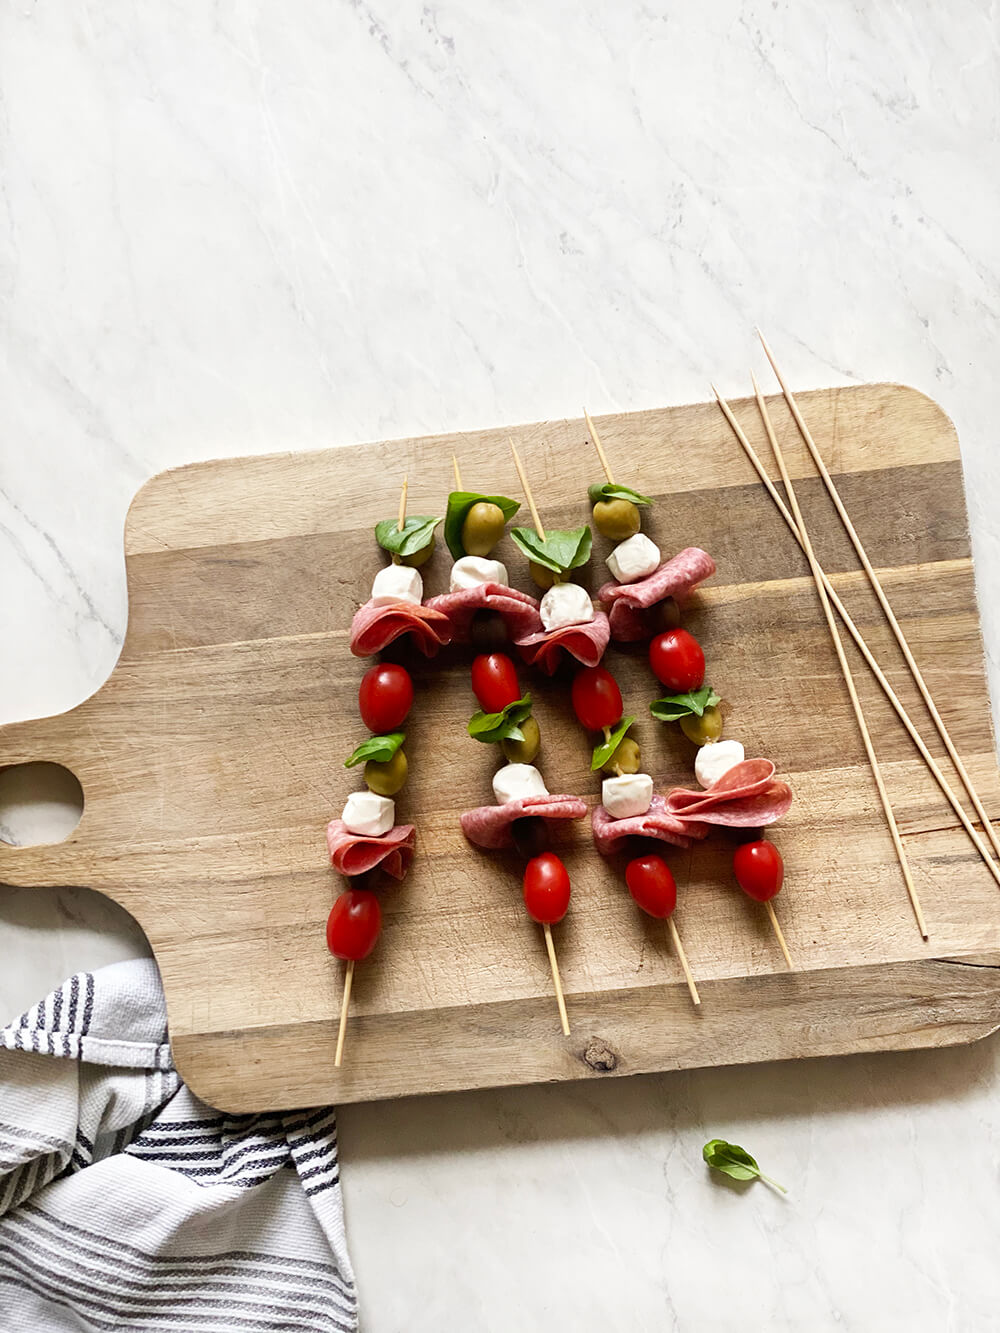 Antipasto skewers and an easy appetizer for those summer gatherings! Light, fresh, and delicious. Catch them over on KaraLayne.com